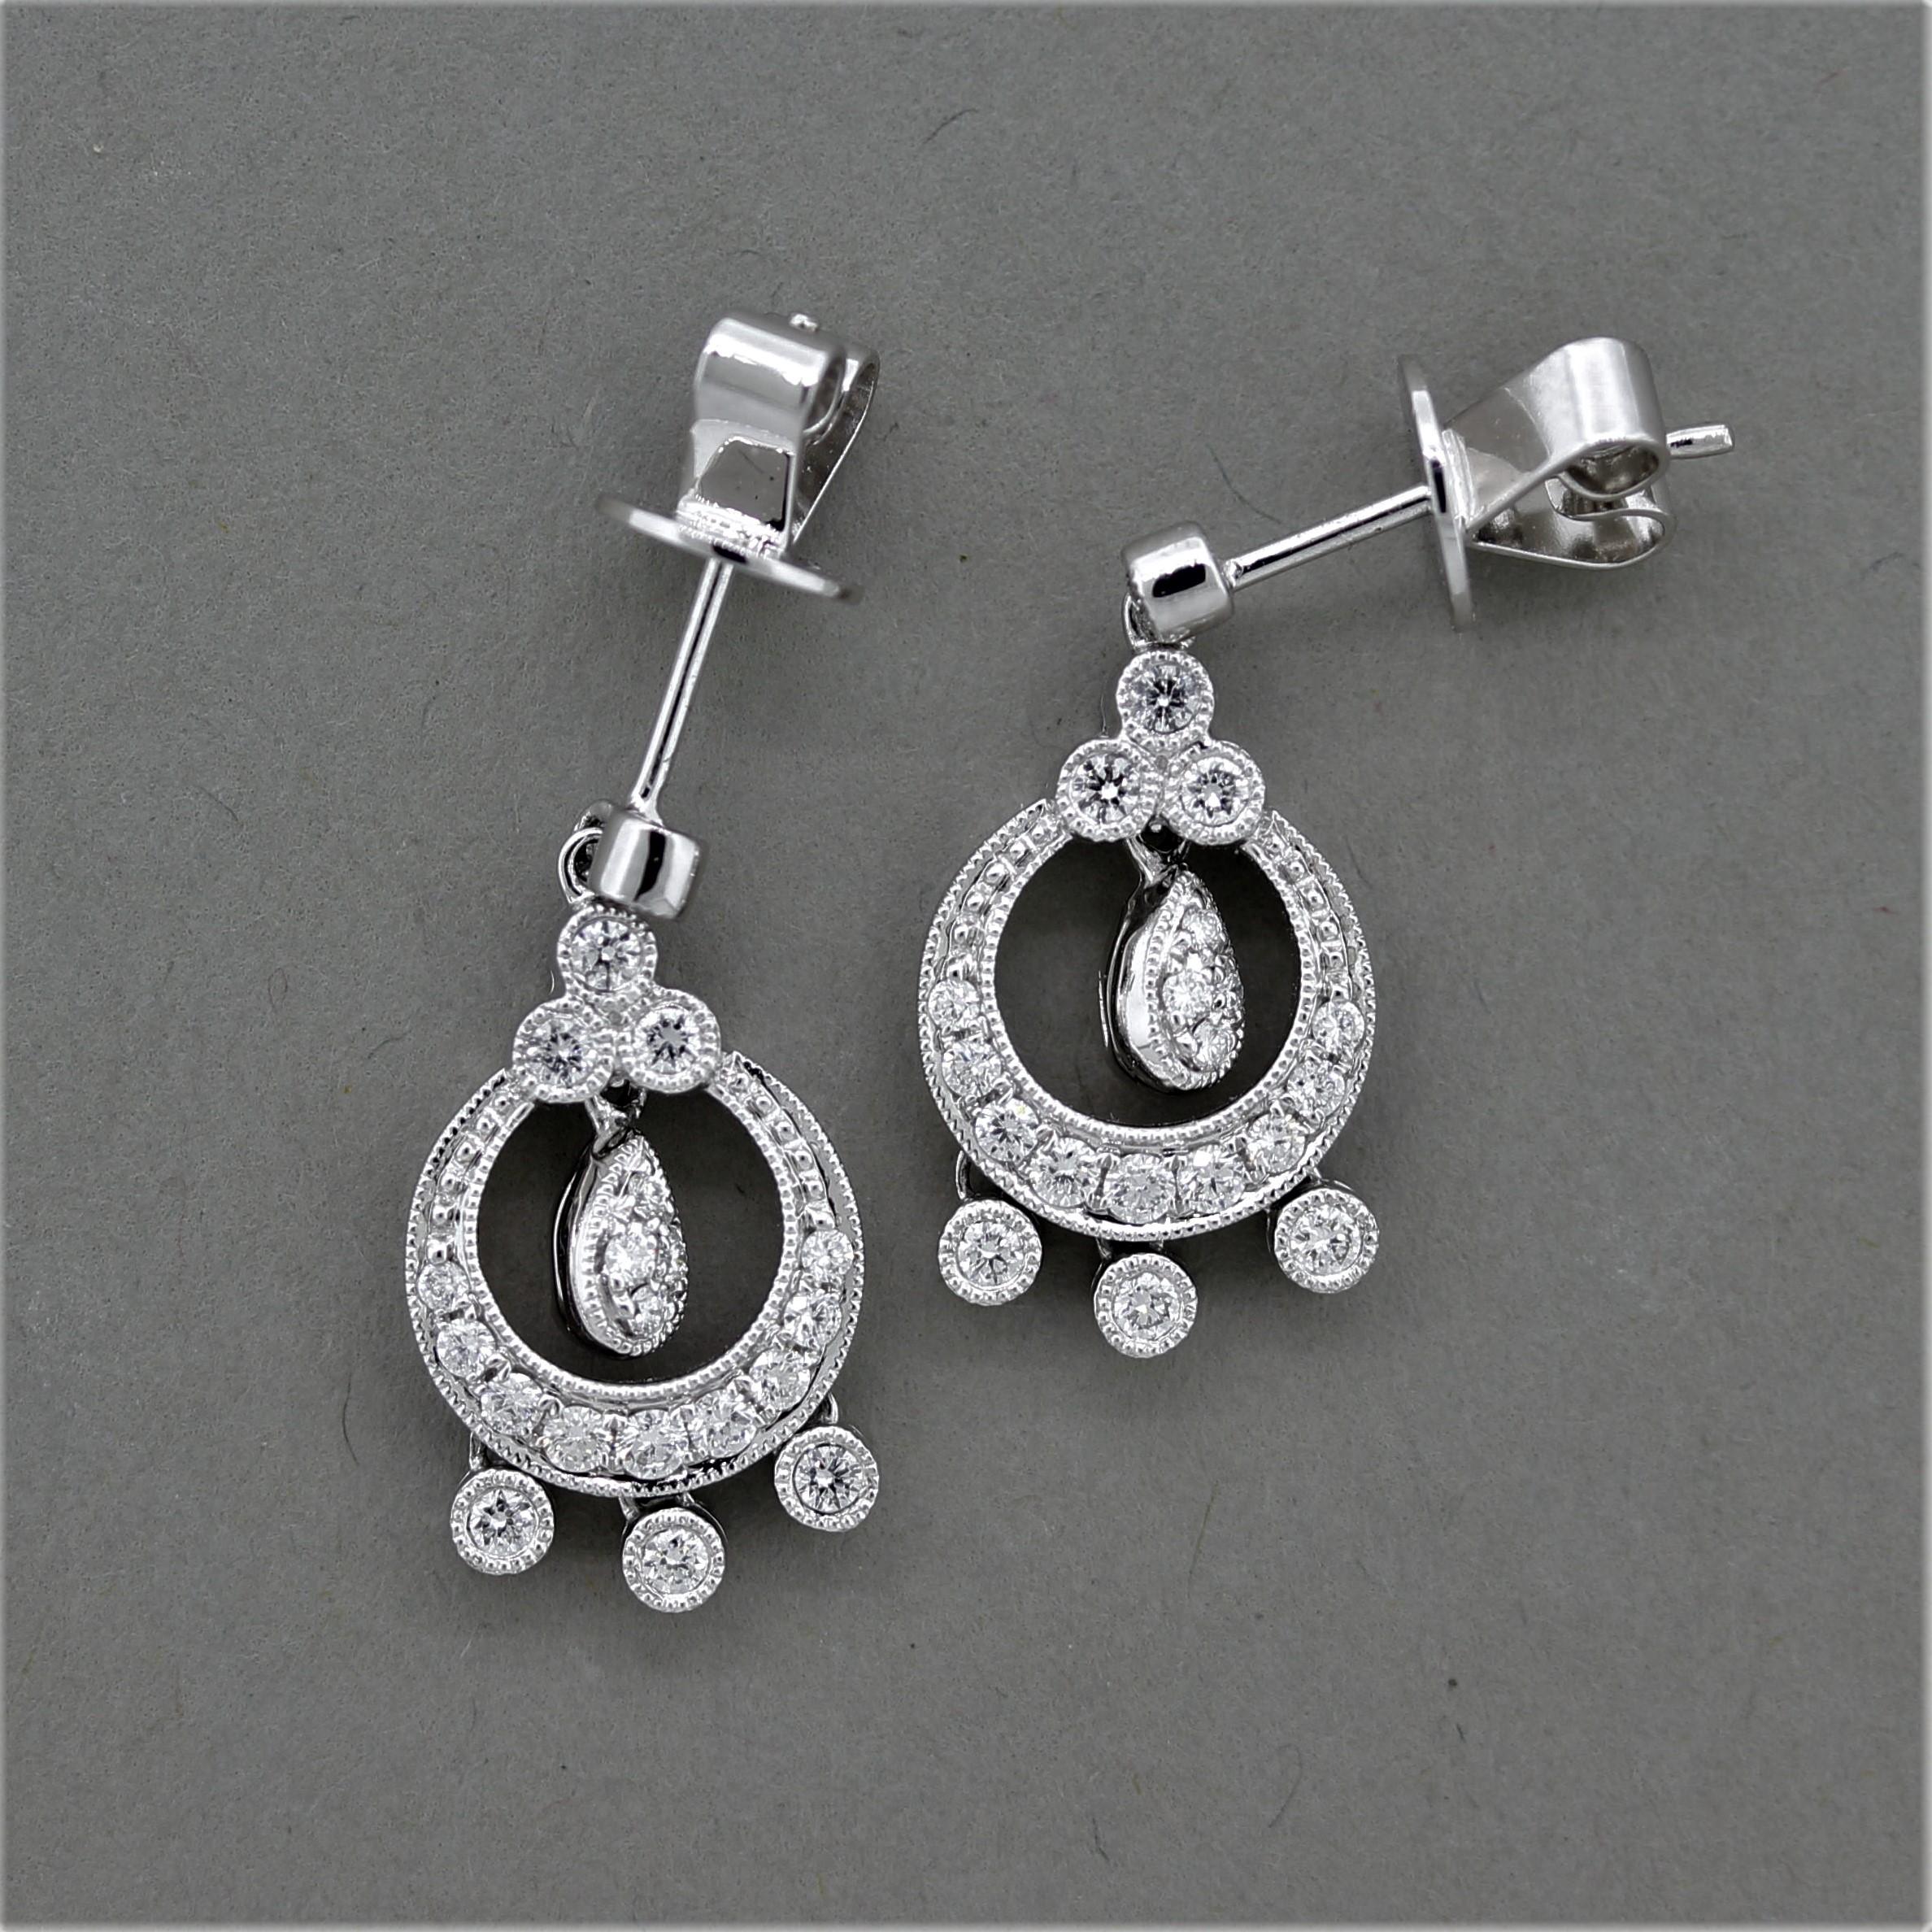 A stylish pair of earrings featuring 0.50 carats of round brilliant cut diamonds. They are set around the 18k white gold earrings and have a milgrain finish around the settings in an antique styled design.

Length: 0.9 inches